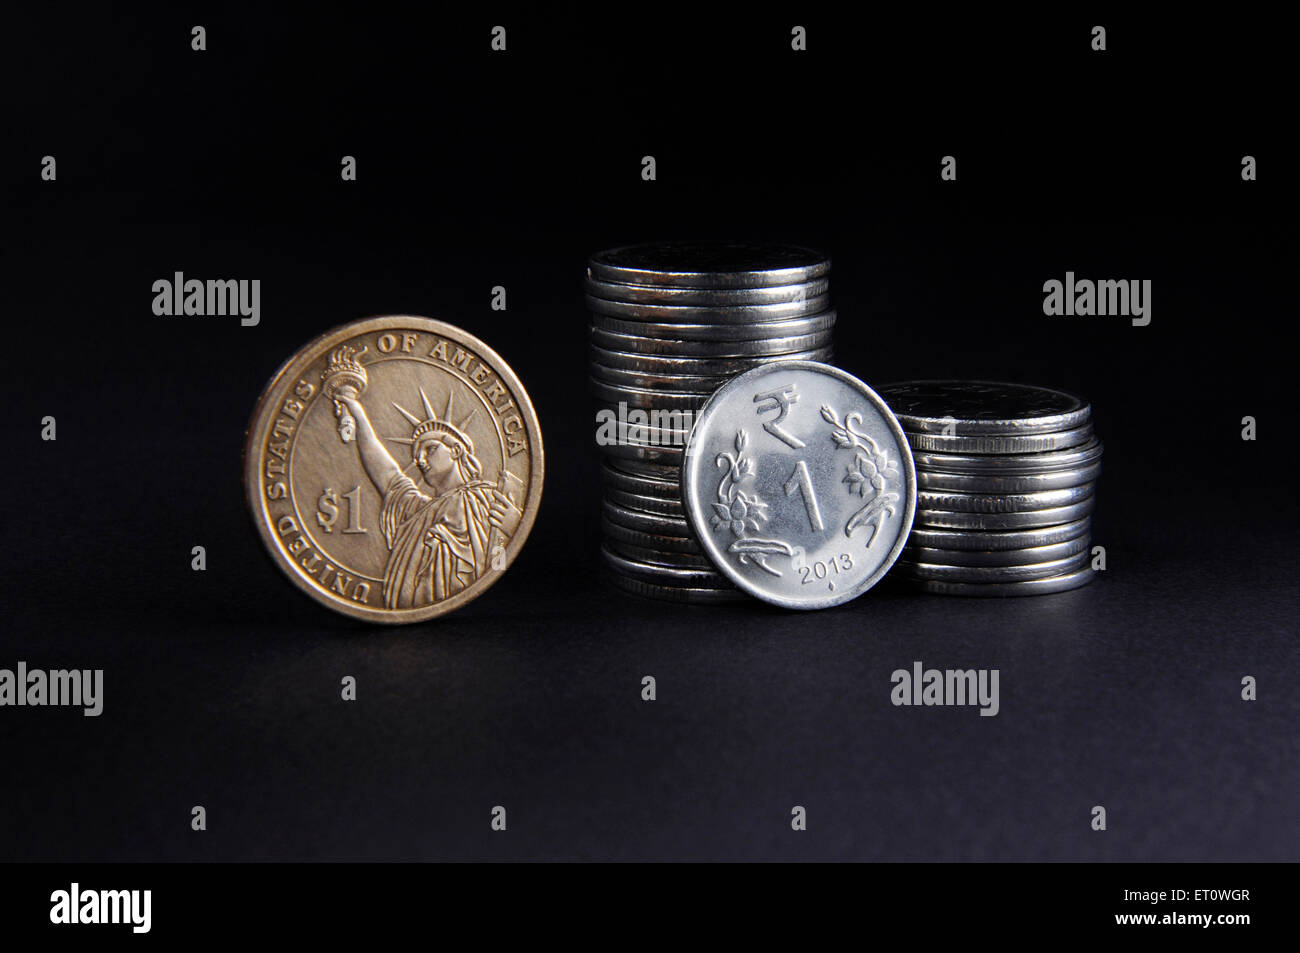 concept of Indian Rupee and American Dollar coins Stock Photo